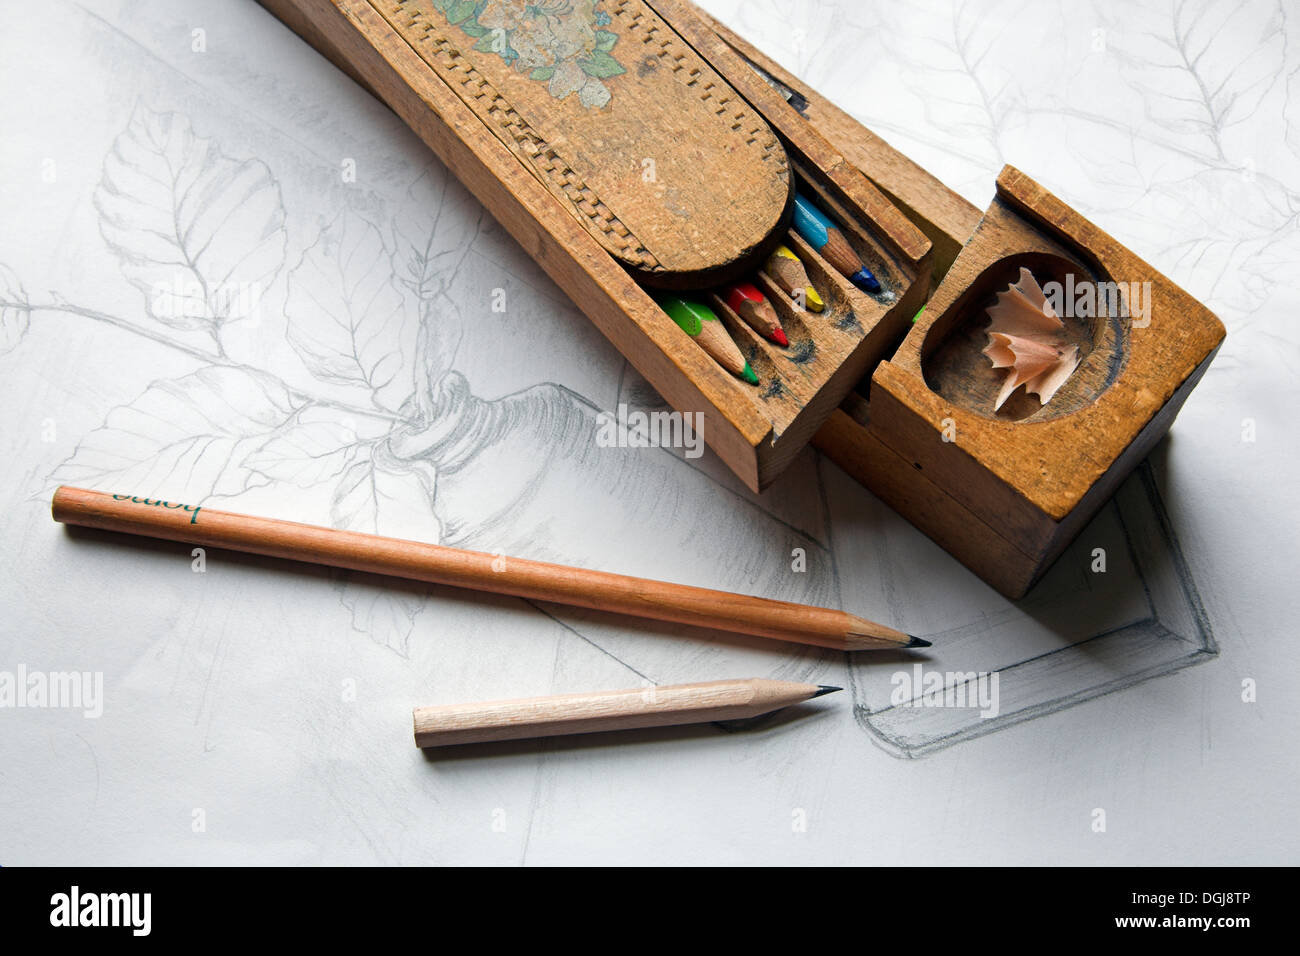 Handmade wooden pencil case and pencils. Stock Photo